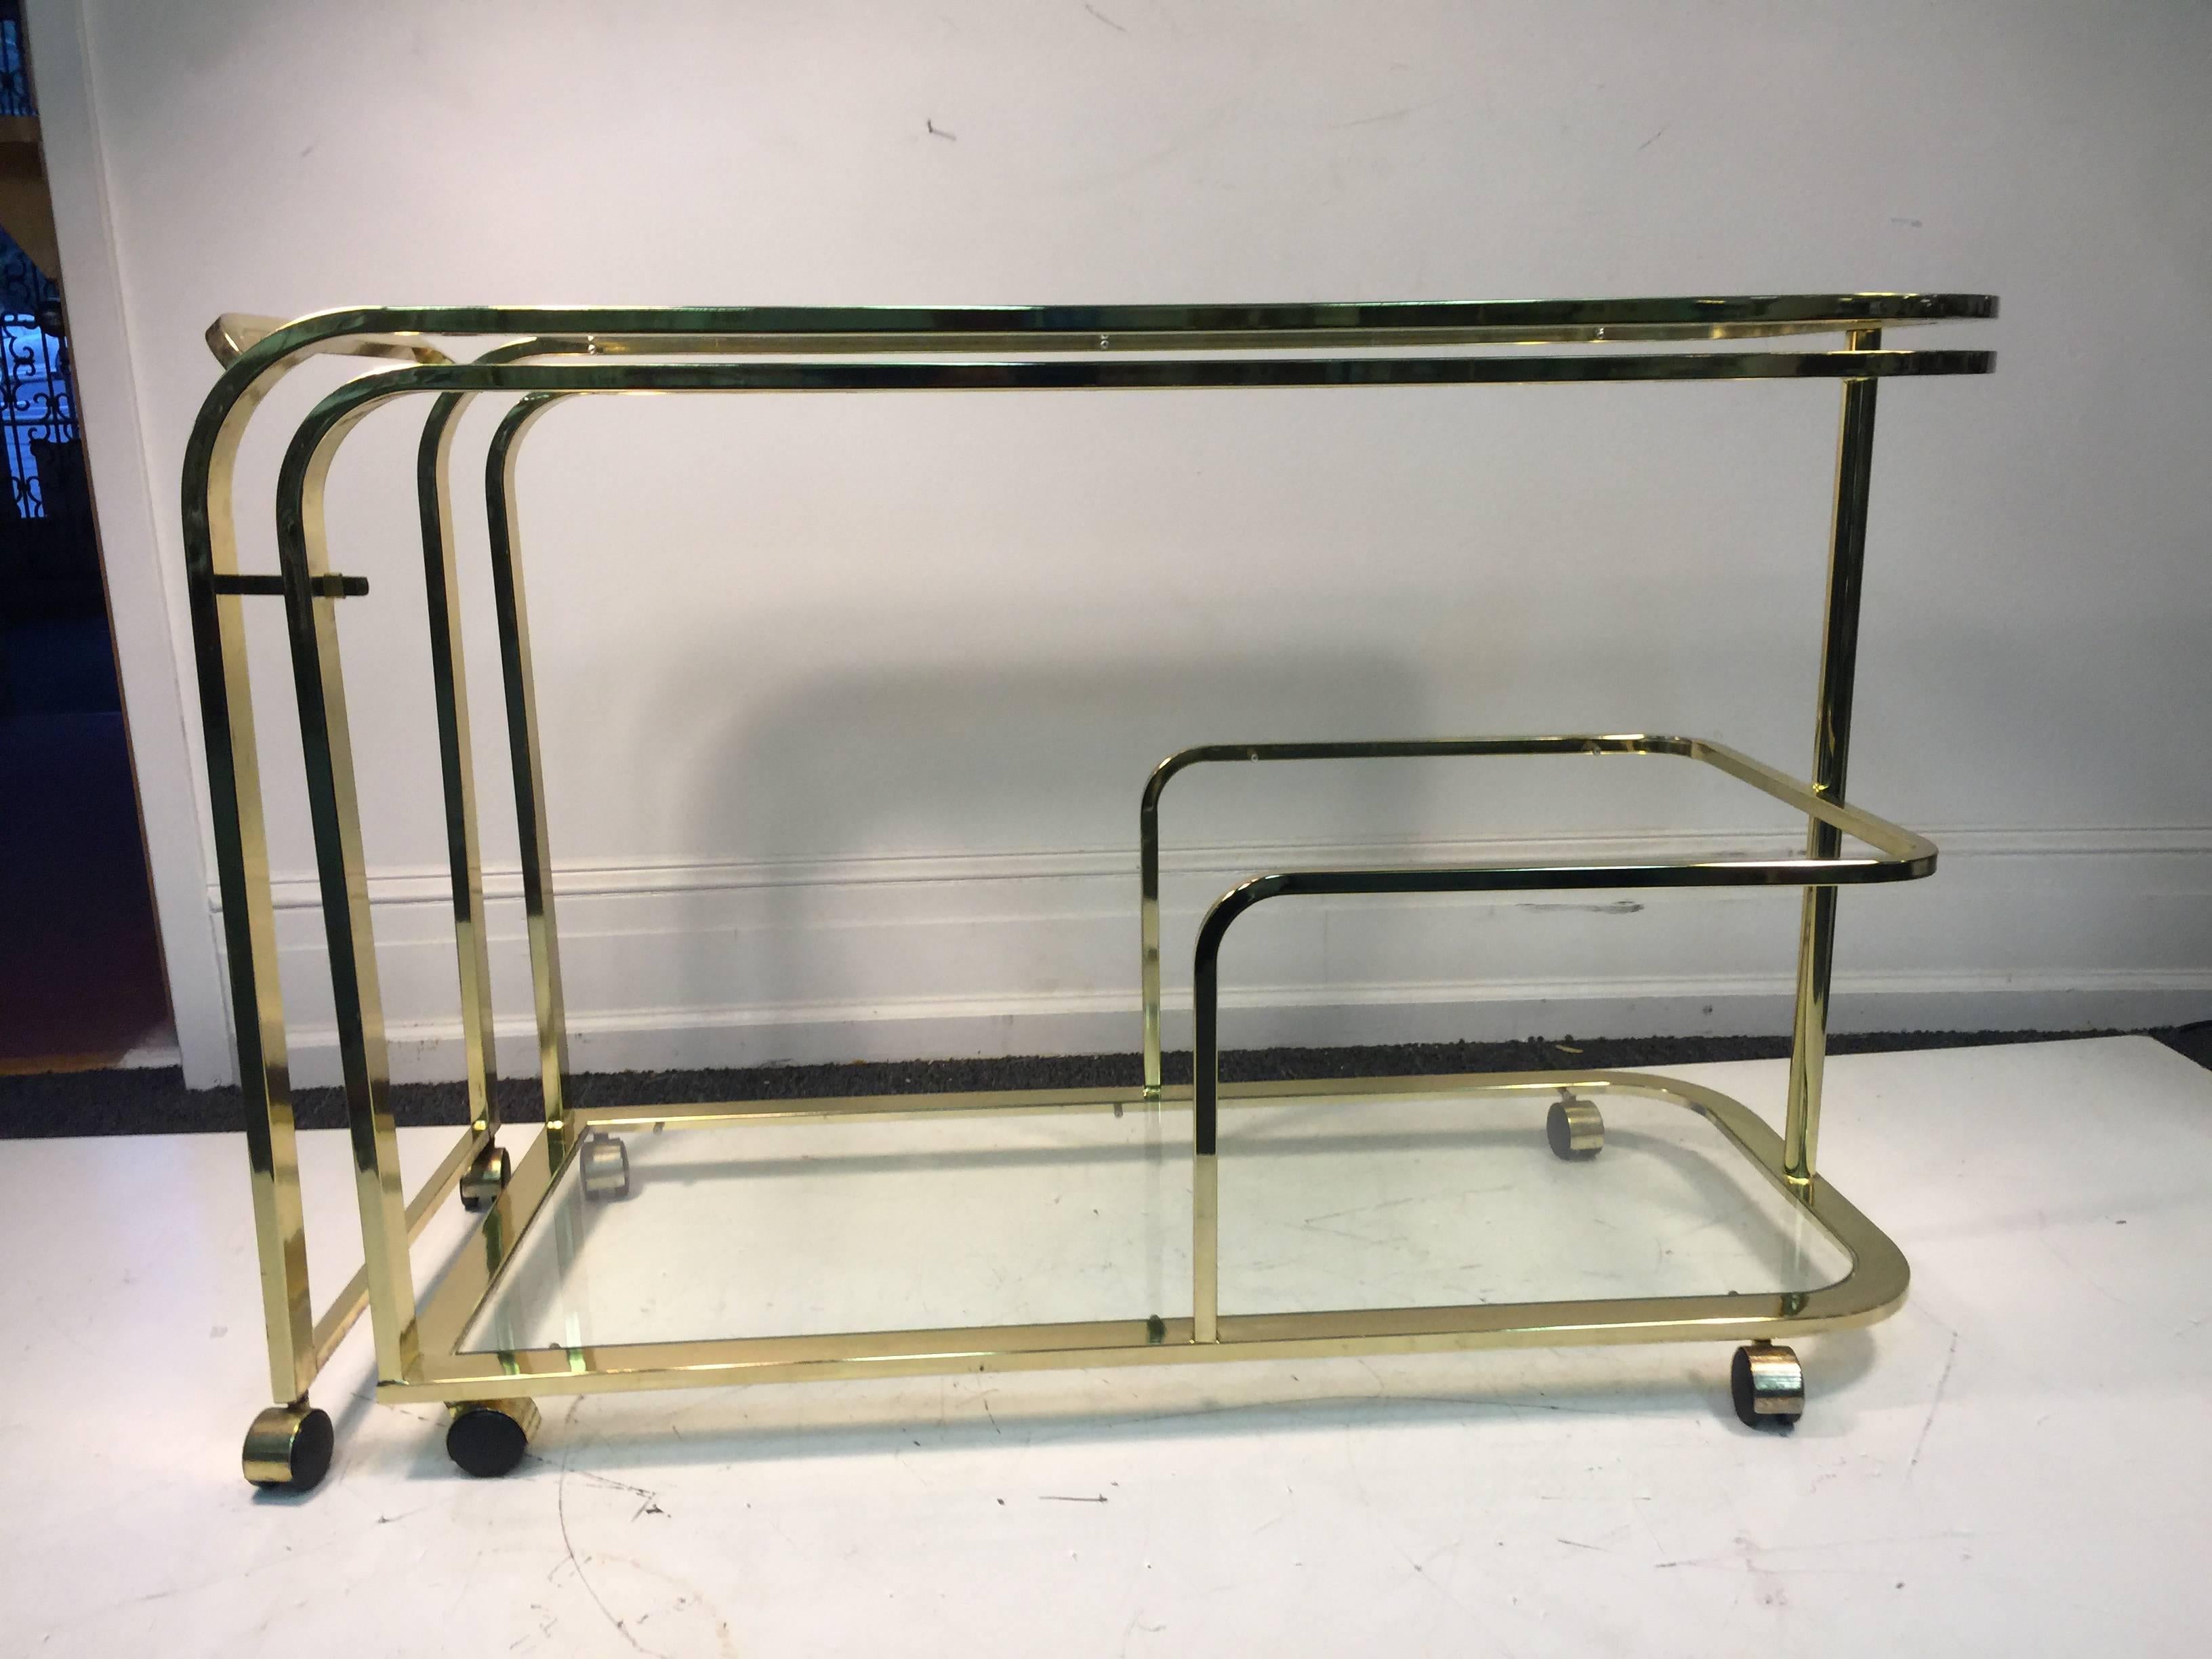 An exceptional, expandable, brass and glass bar or tea cart by Milo Baughman for design institute of America, circa 1970. Double the space for serving.